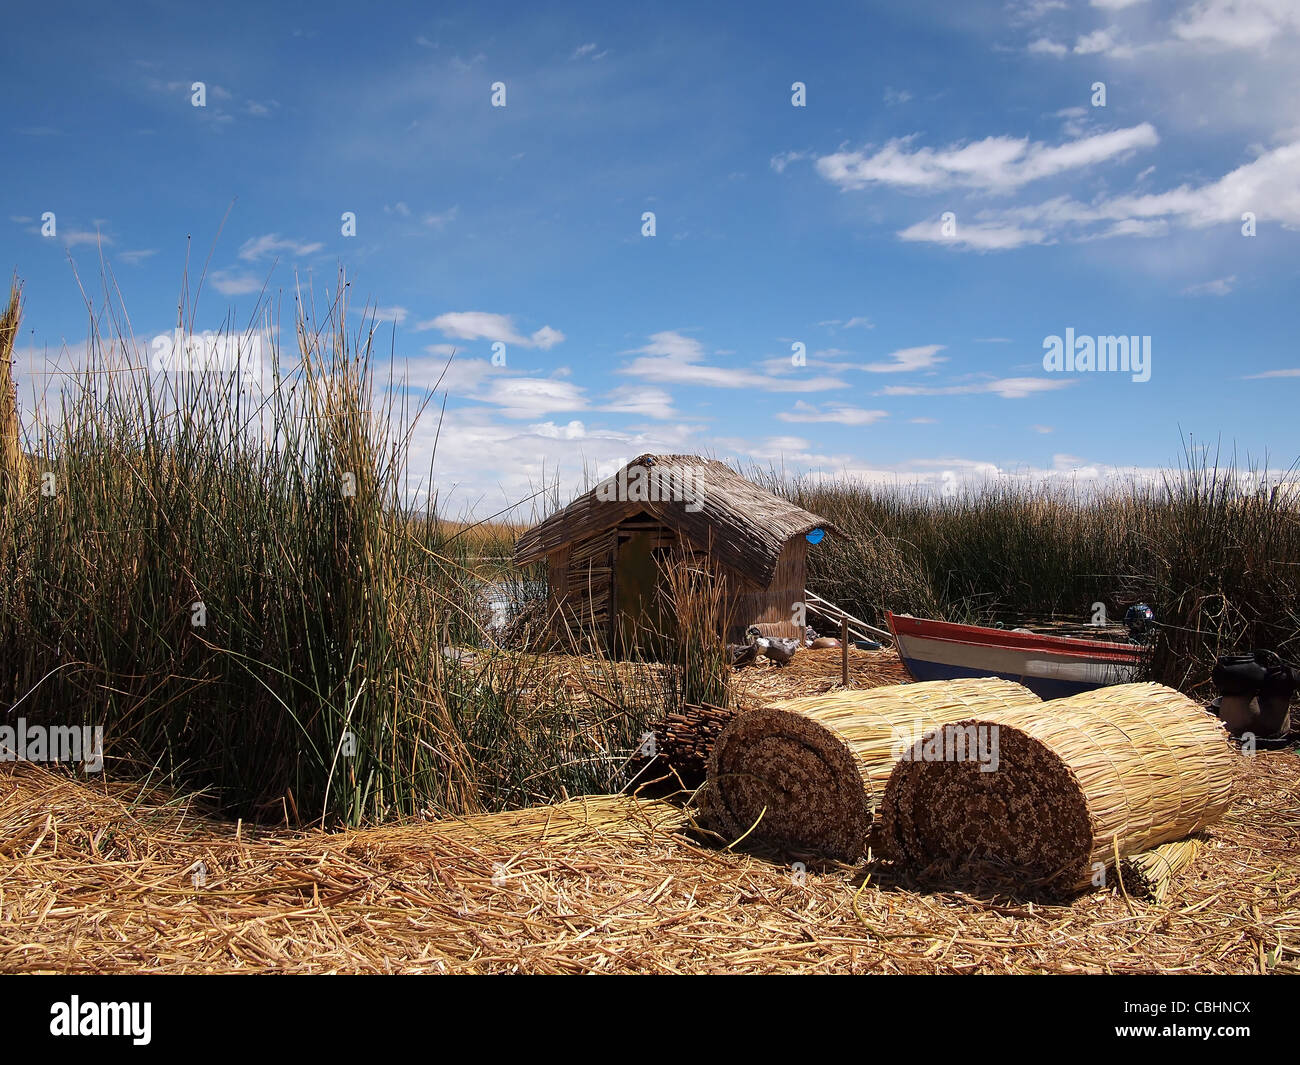 Hut made of reed and lots of drying reed on one of the floating Uros islands inside Lake Titicaca, Peru. Stock Photo